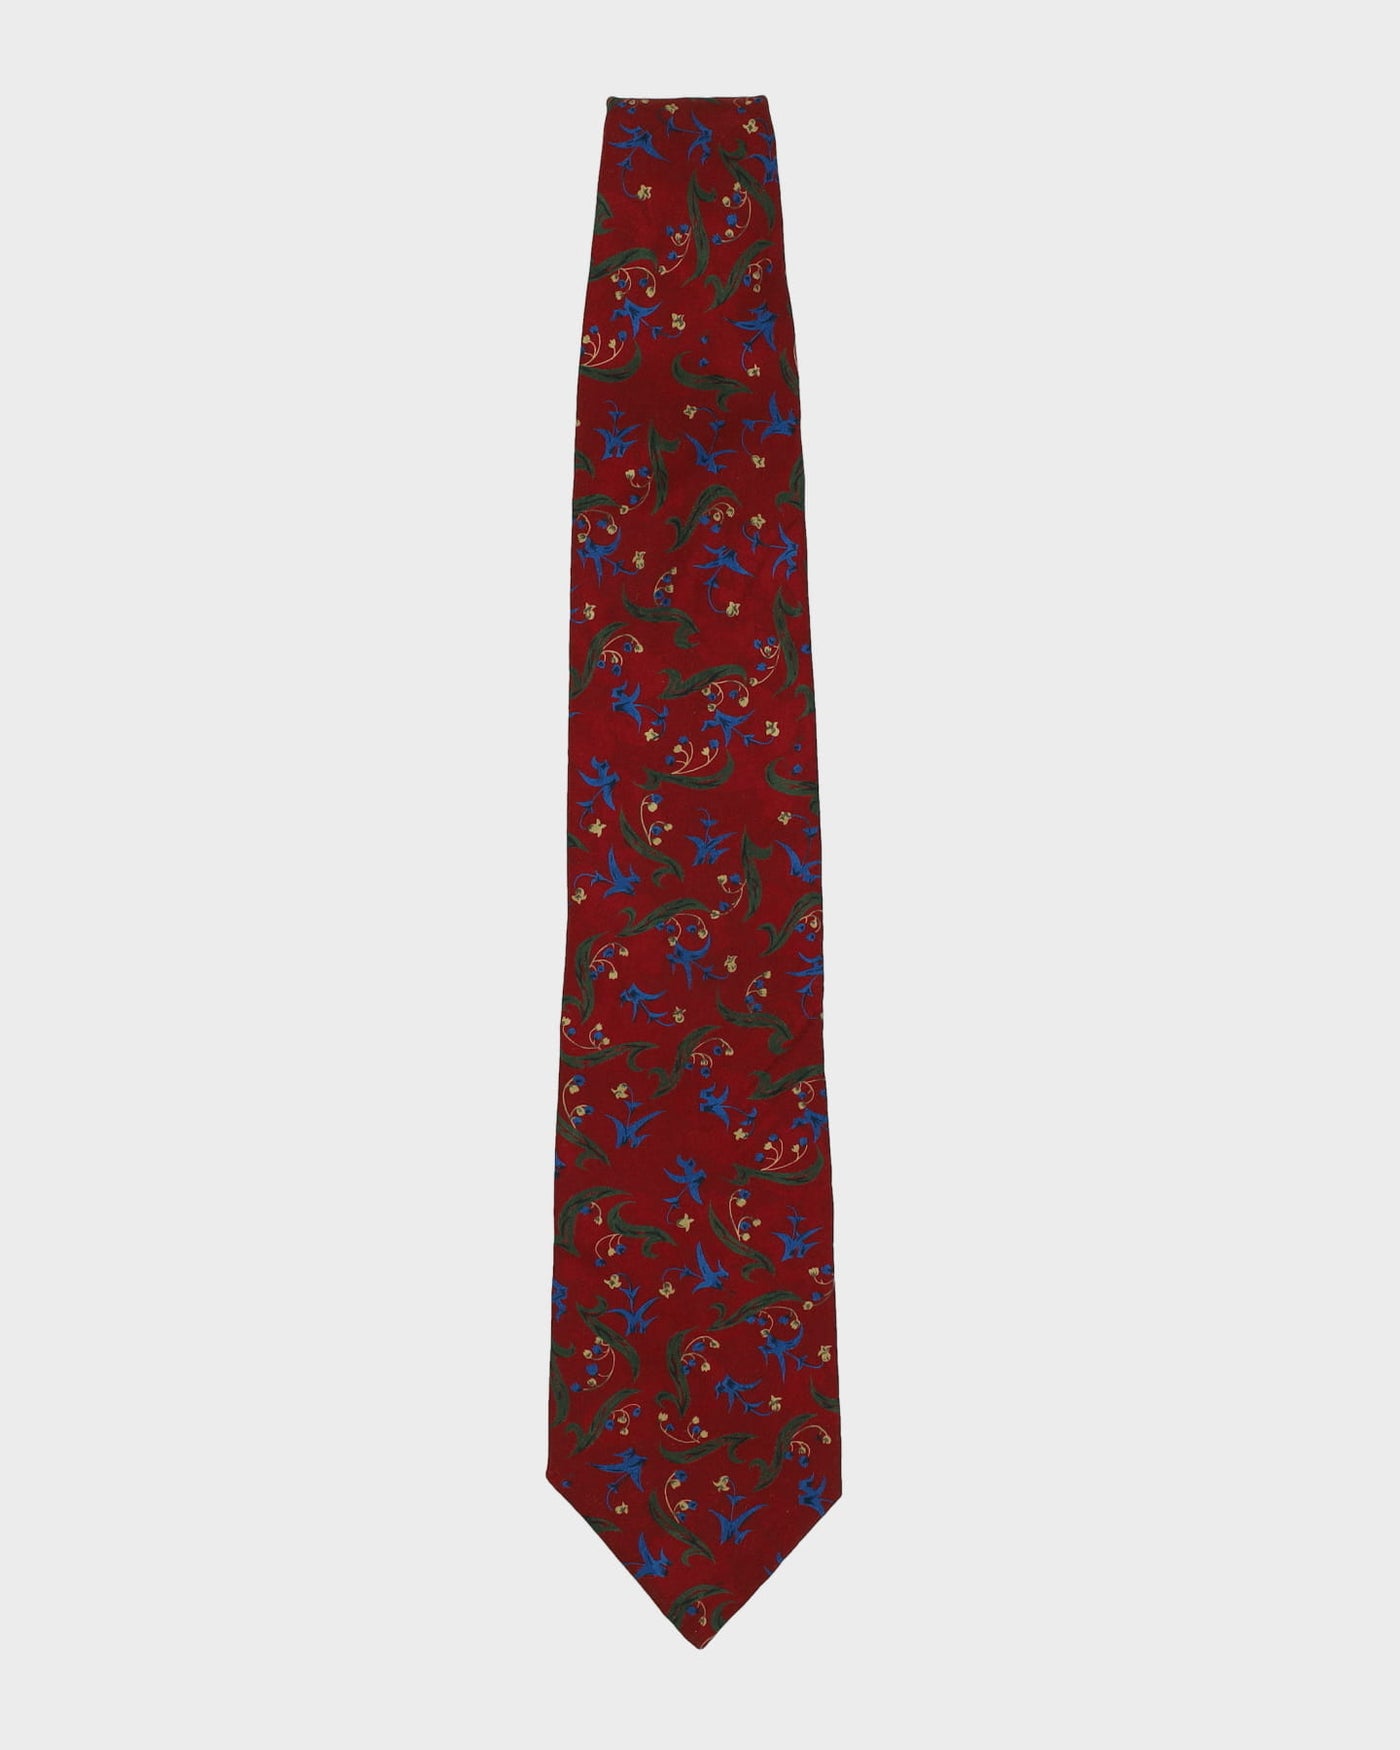 Vintage 90s Christian Dior Red / Green / Blue Patterned Tie